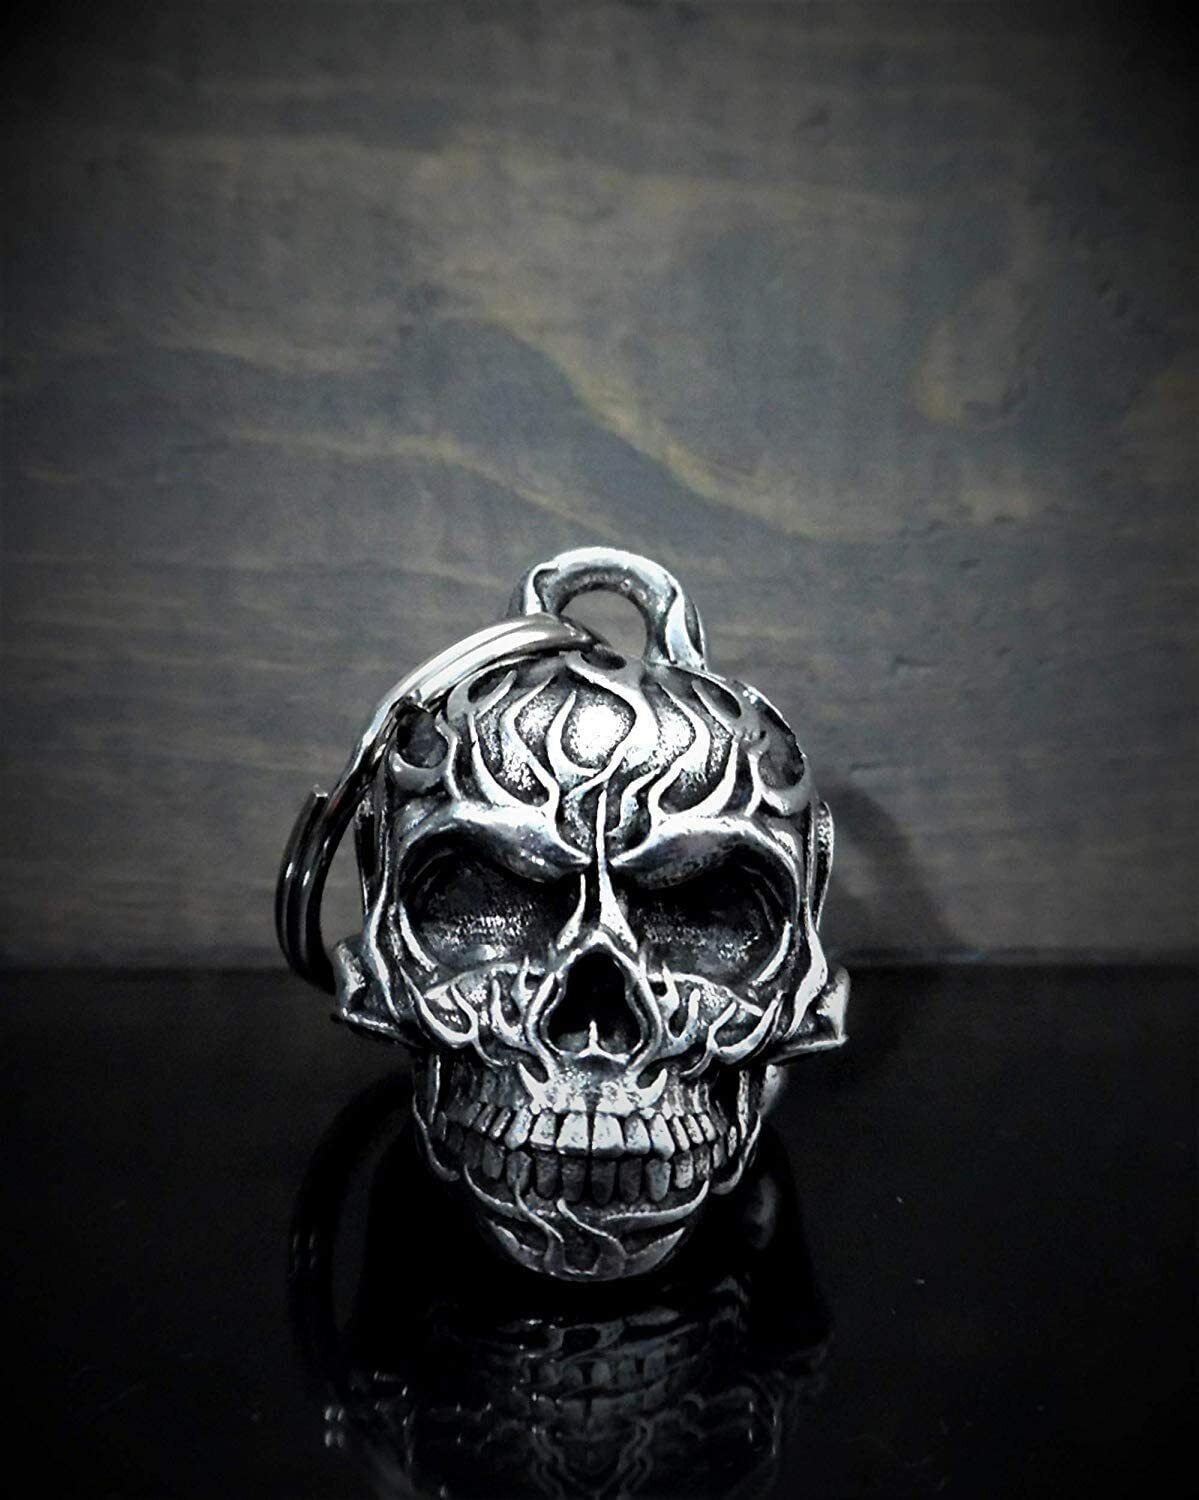 Flame Skull Motorcycle Biker Bell Accessory Ride Gift Good Luck BB-53 Made in US